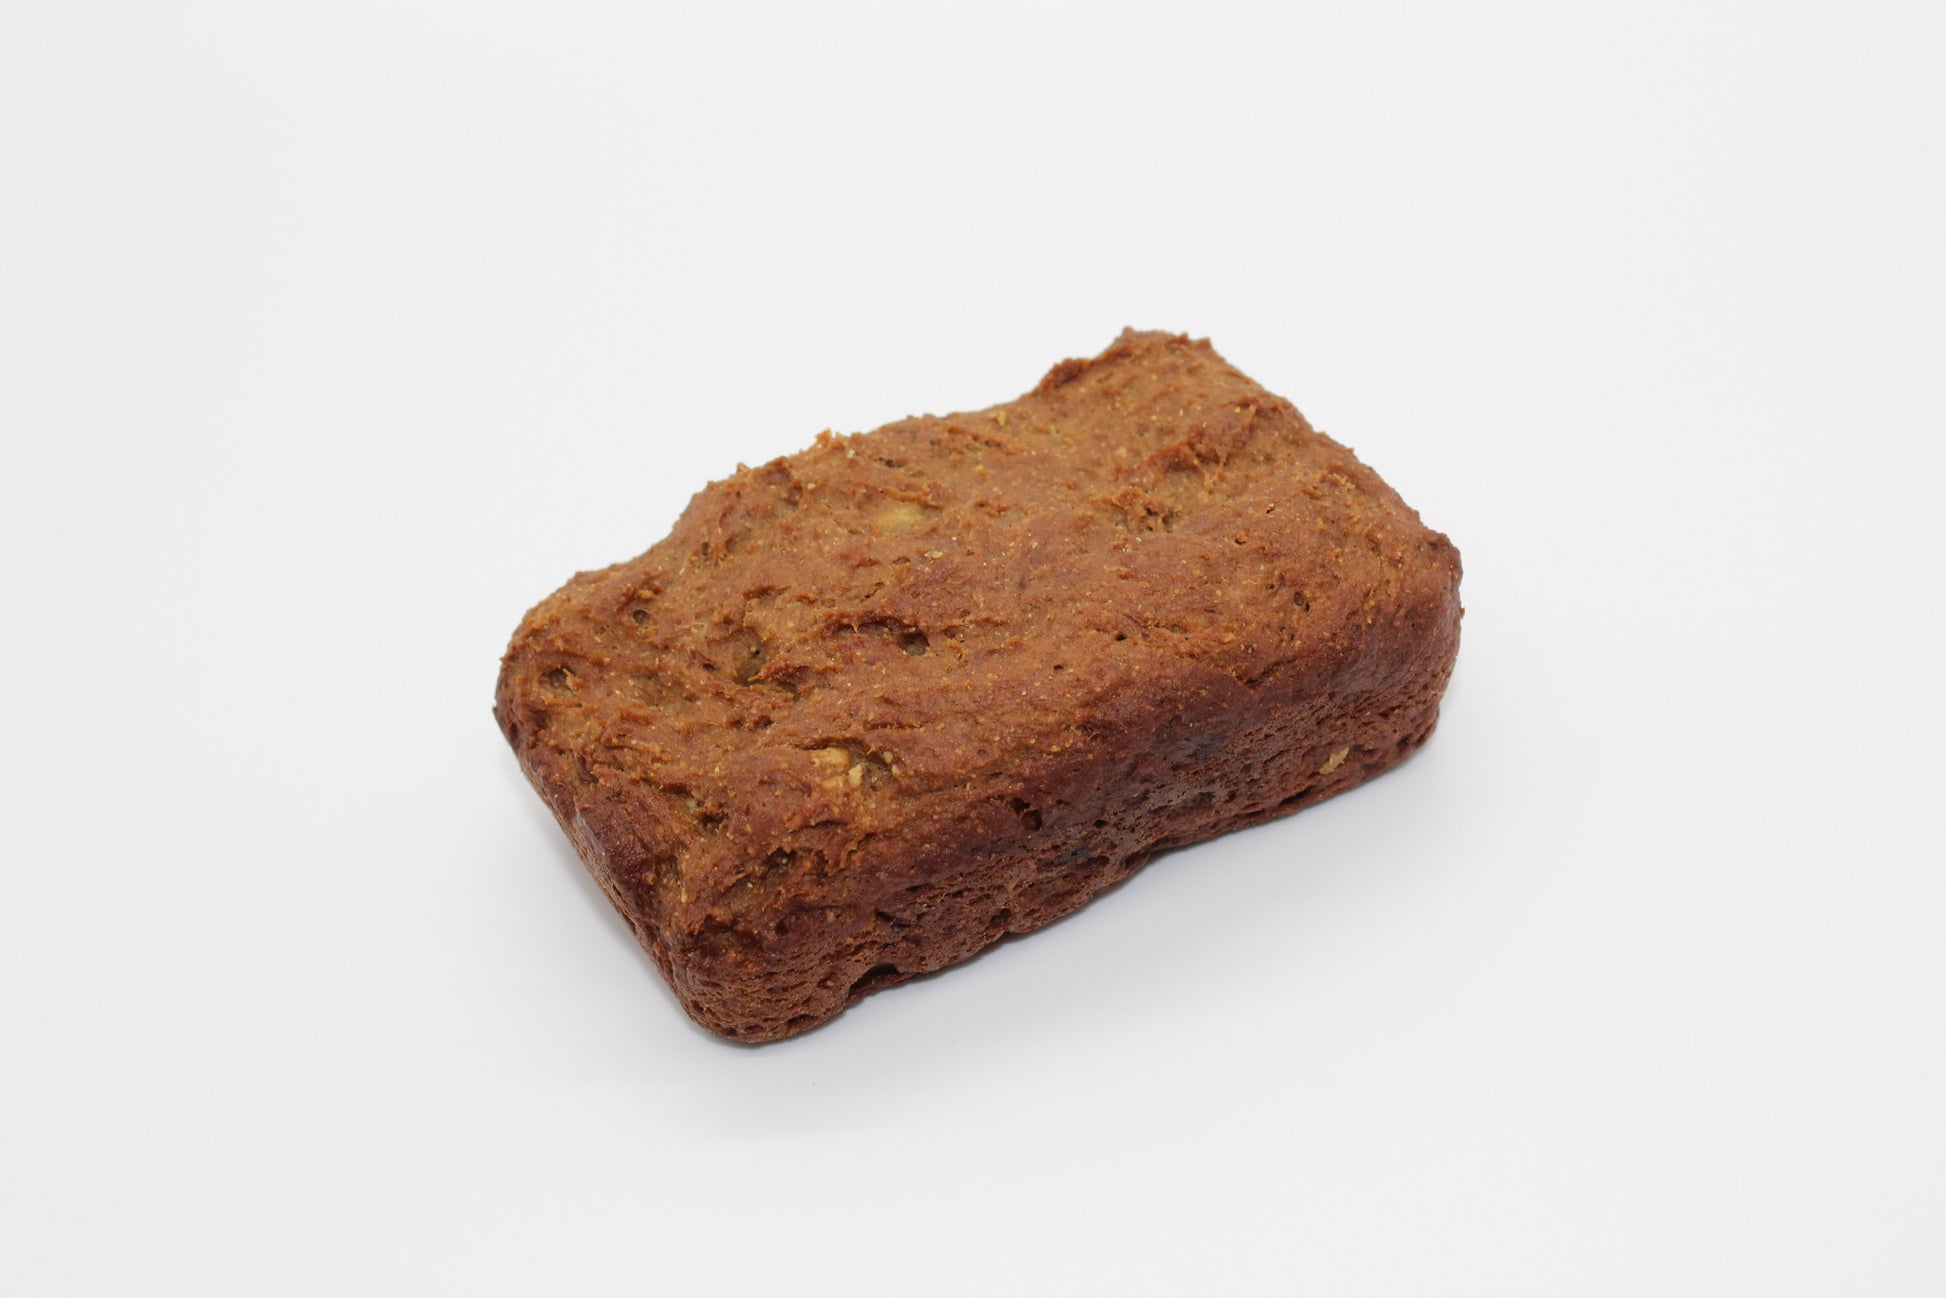 A plain peanut butter and banana flavored bakery loaf for dogs.